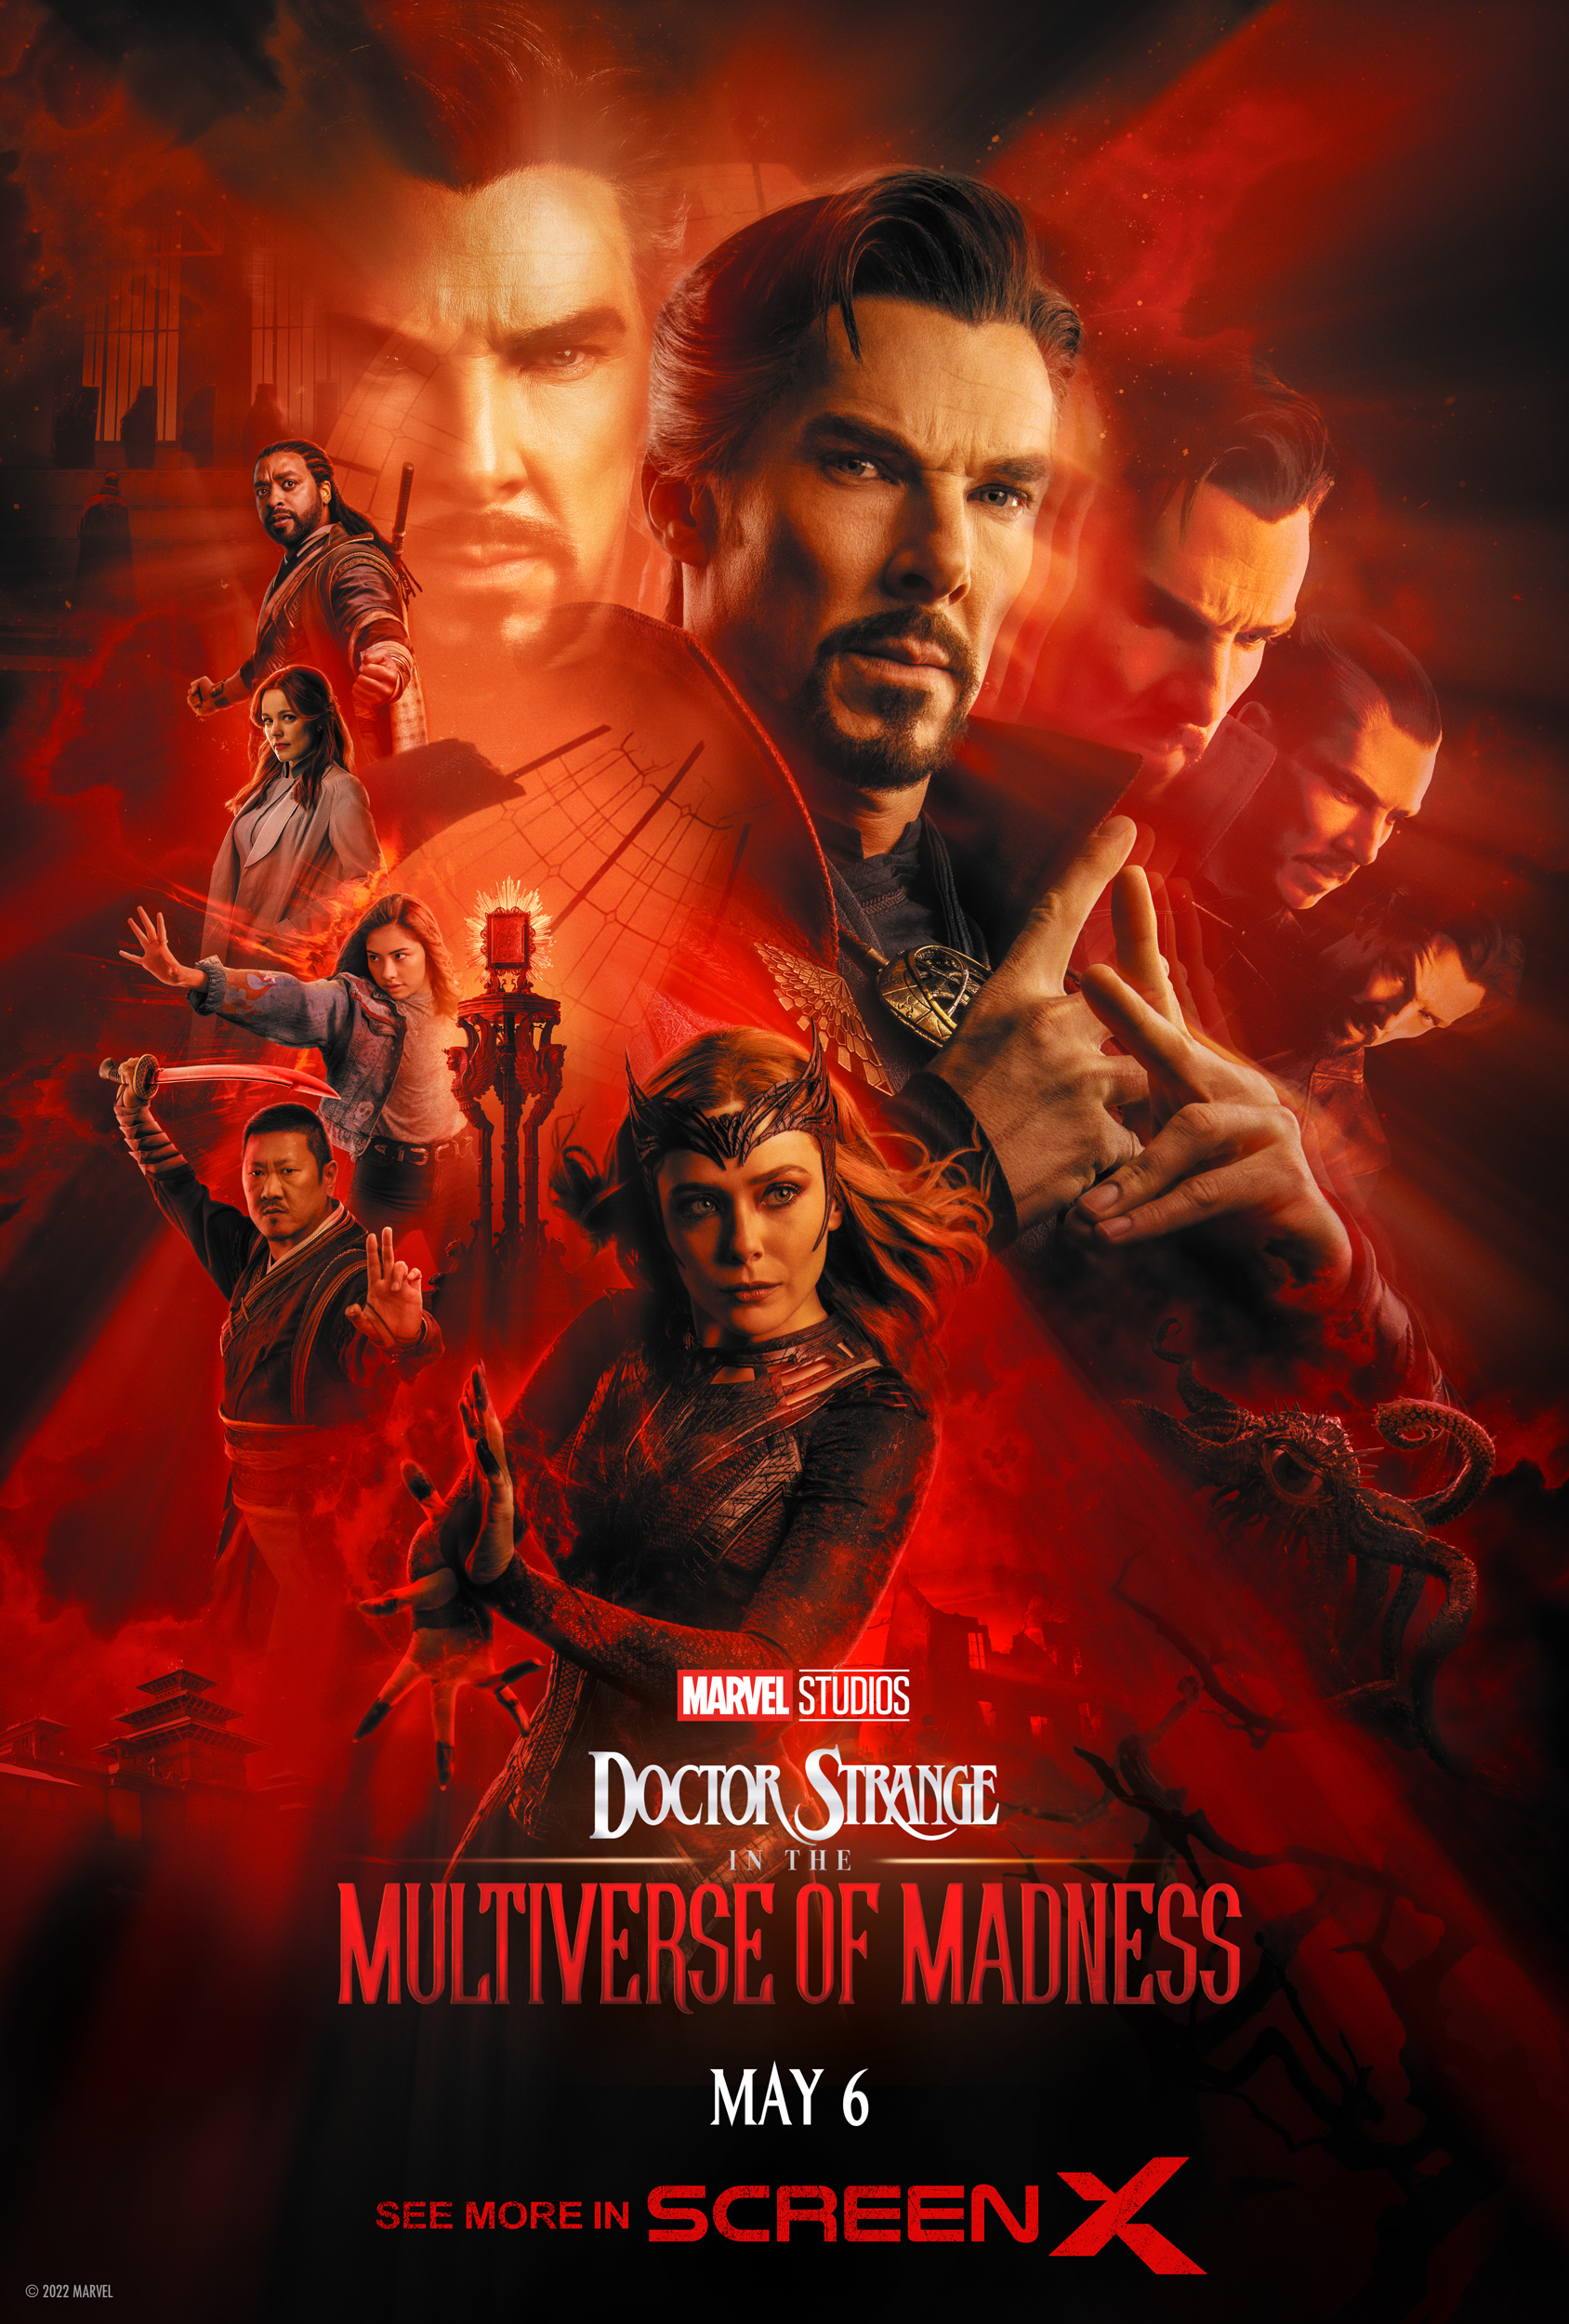 Doctor Strange in the Multiverse of Madness (2022) 480p HDRip x264 ESubs ORG. [Dual Audio] [Hindi or English] [400MB] Full Hollywood Movie Hindi